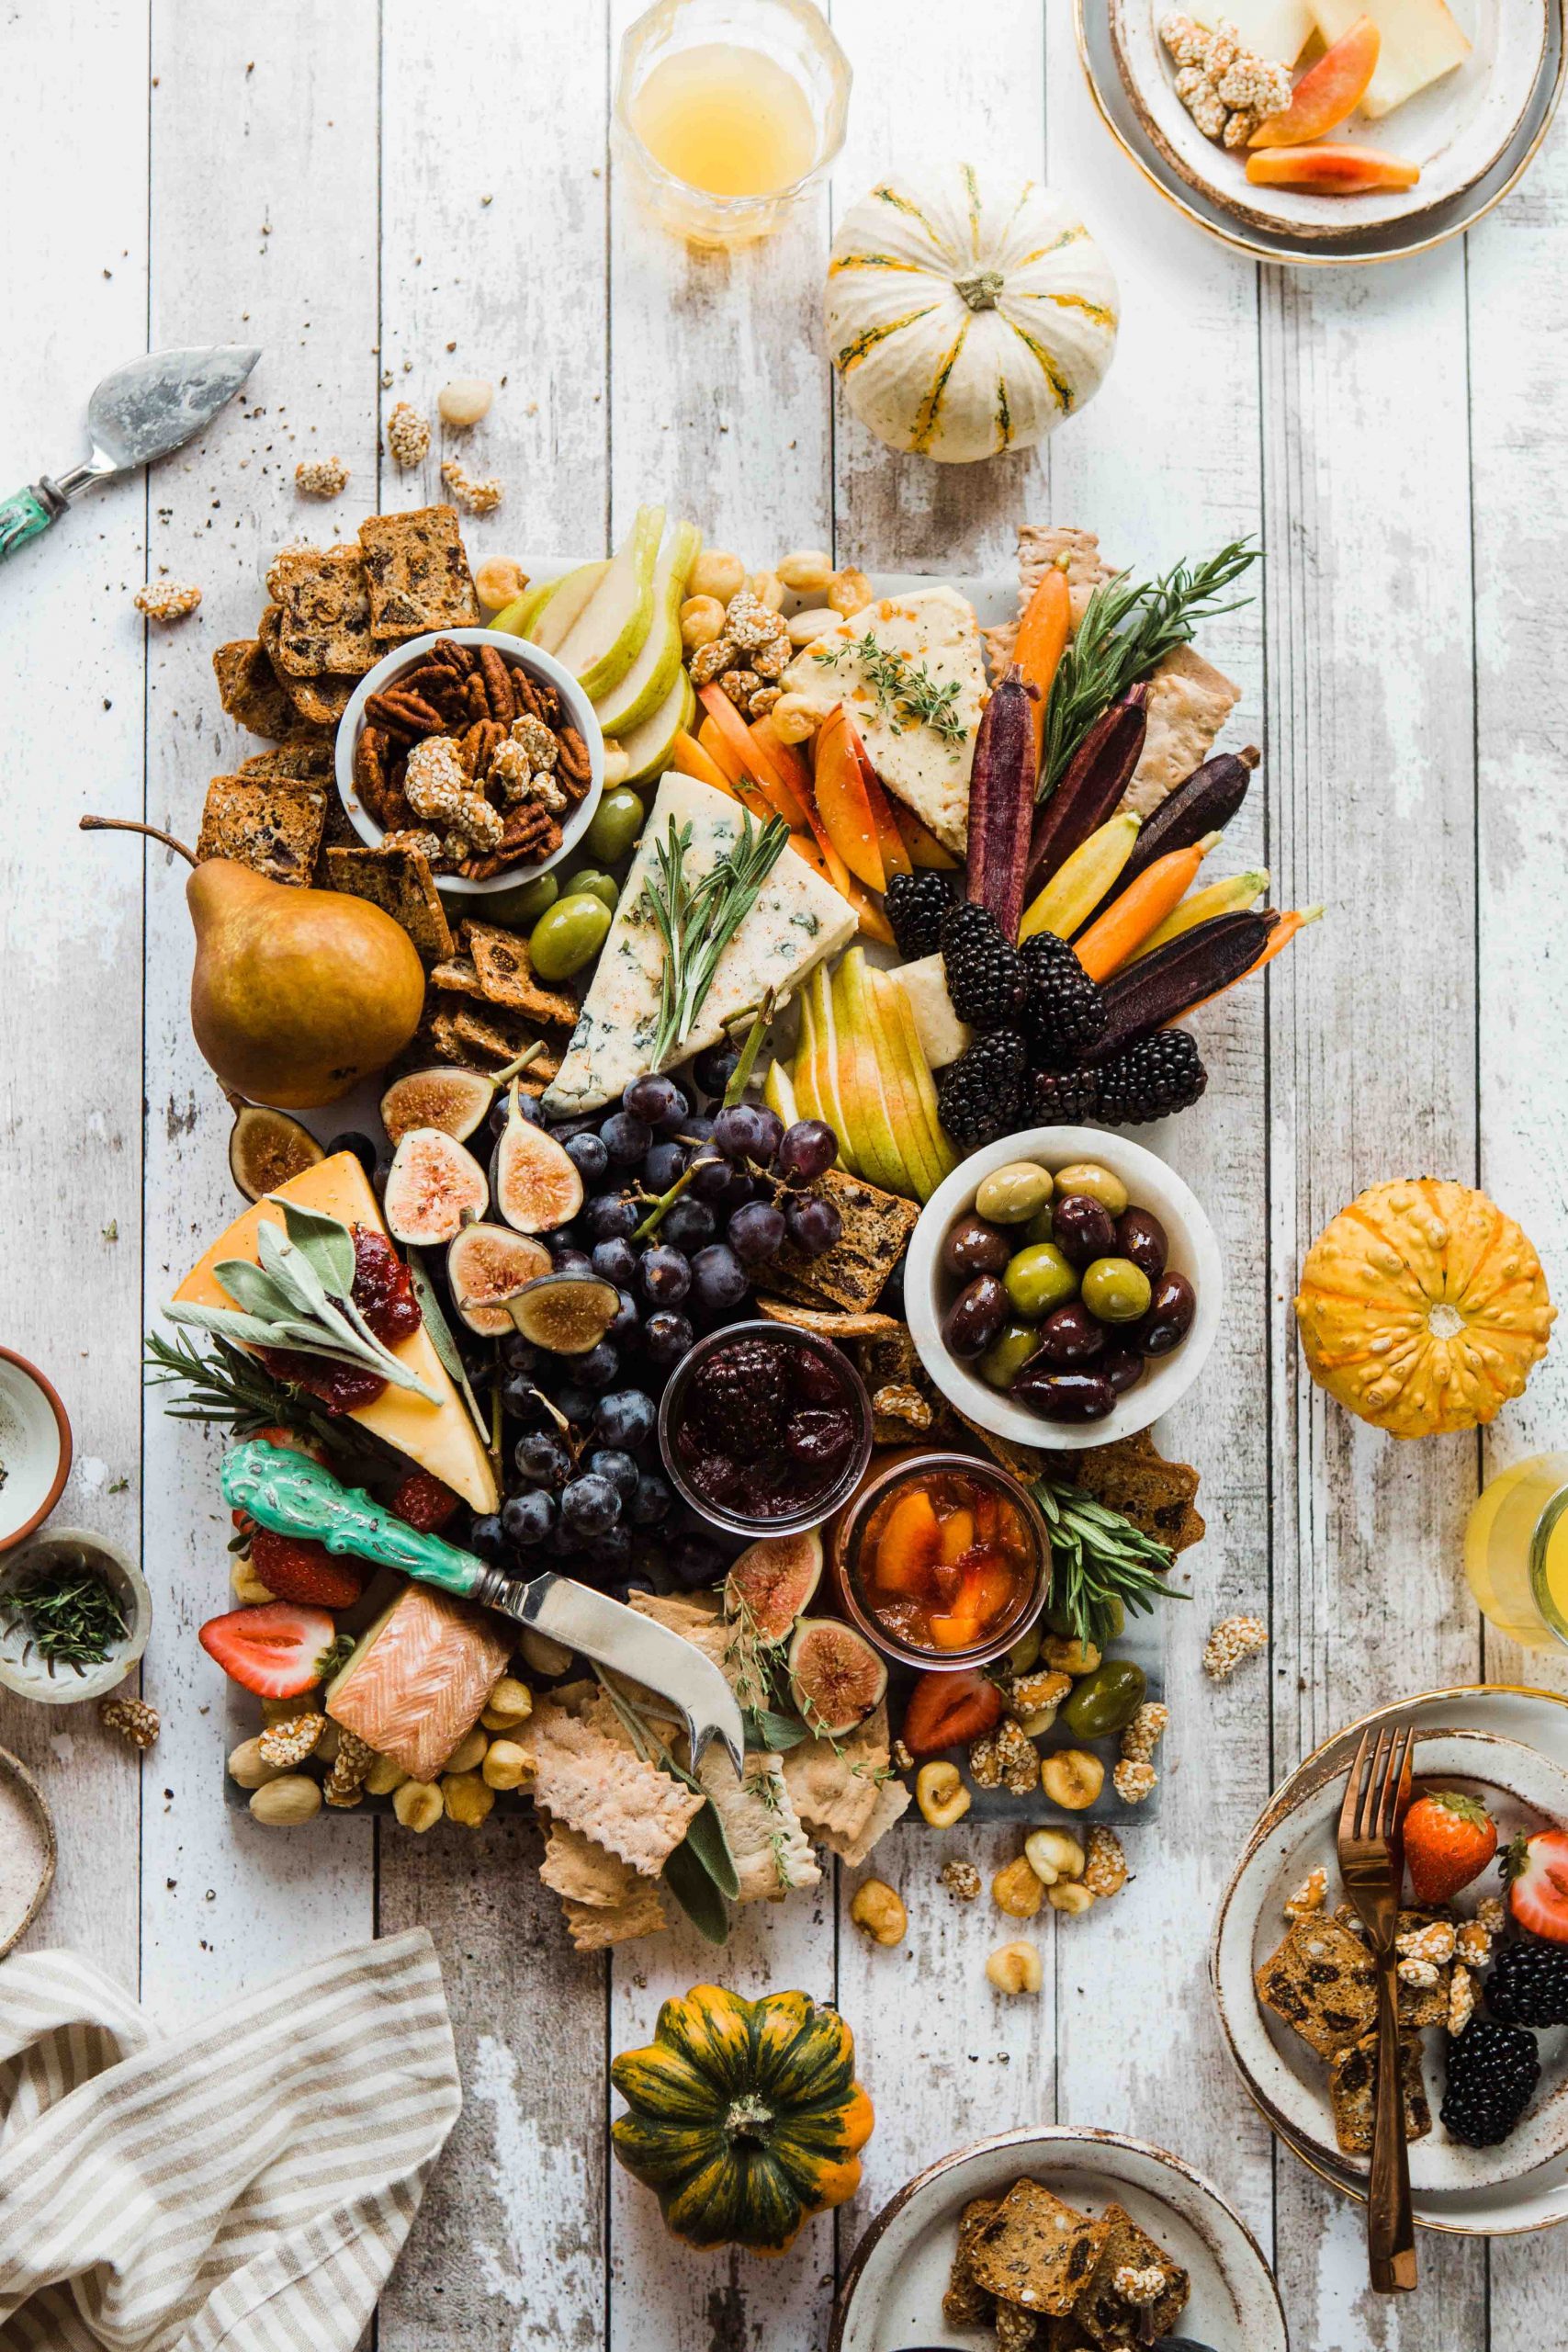 Tips for the best fall cheese board